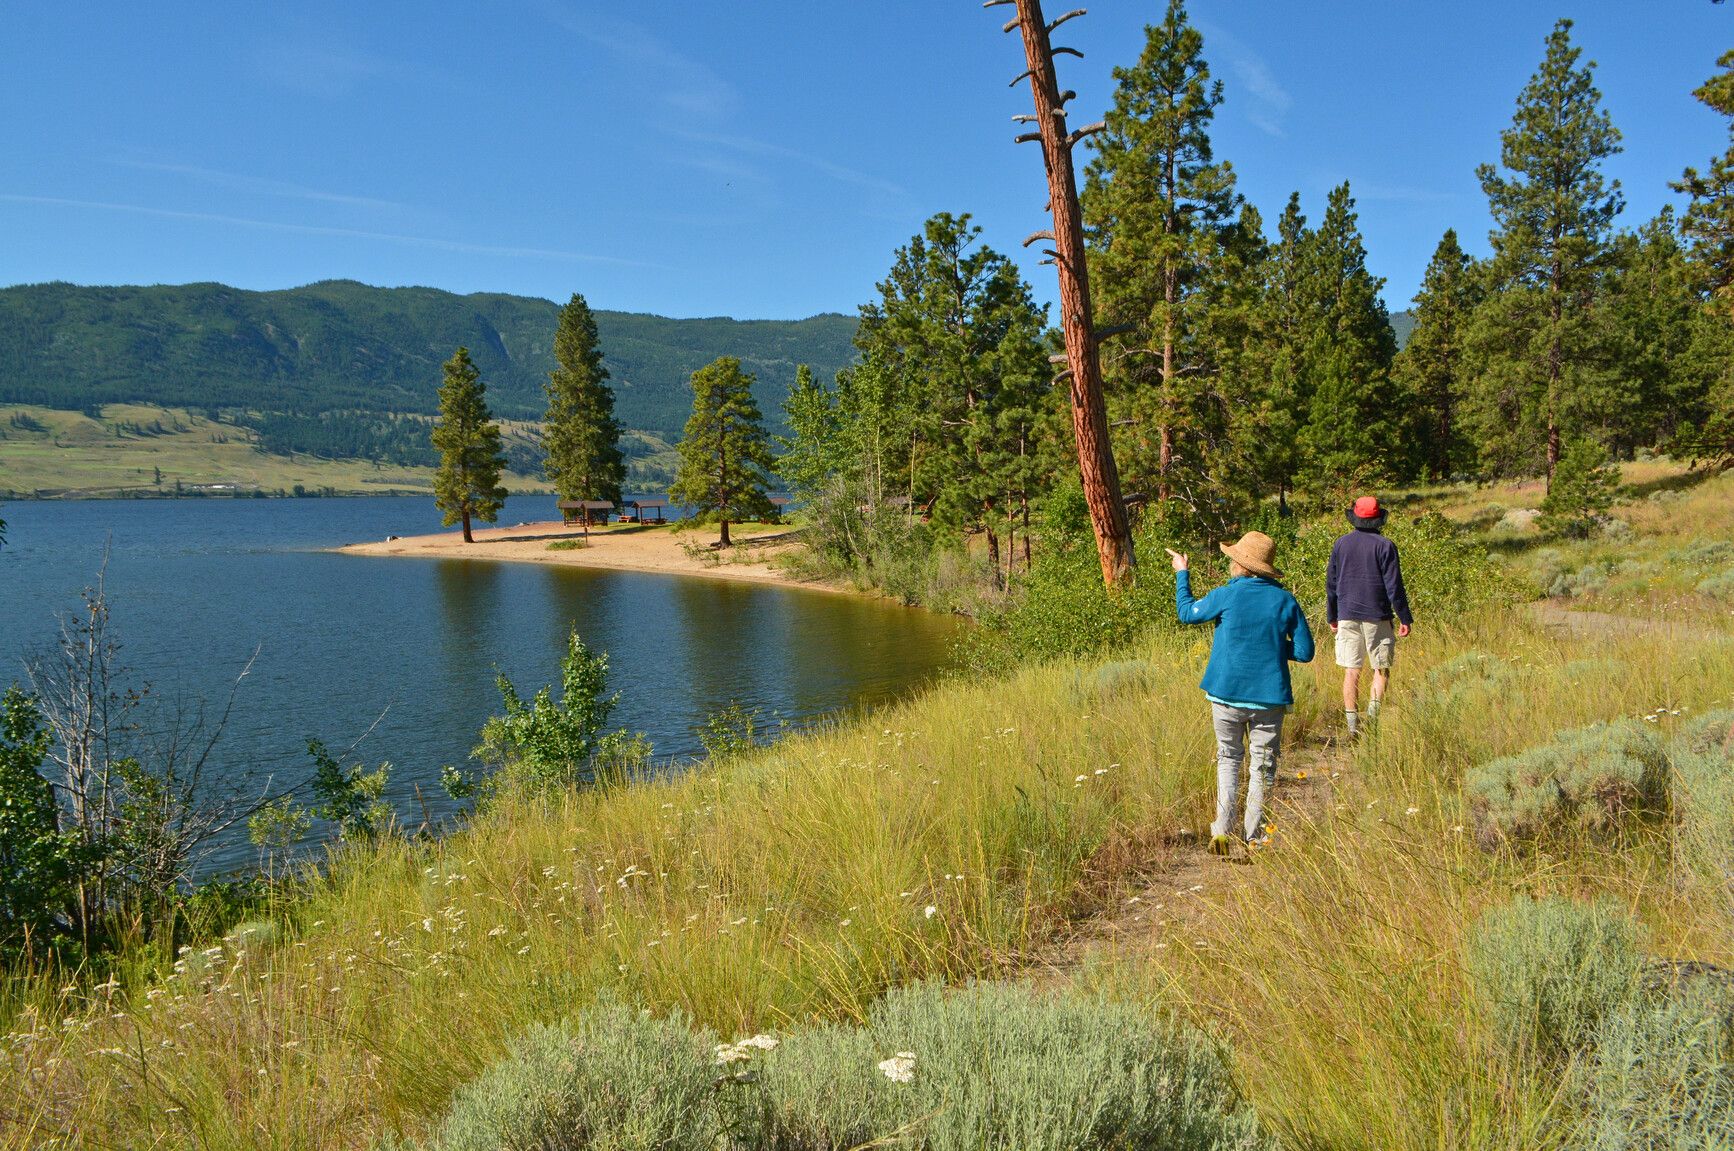 Experience the beauty of Nicola Lake as you stroll along a lakeside trail at Monck Park.